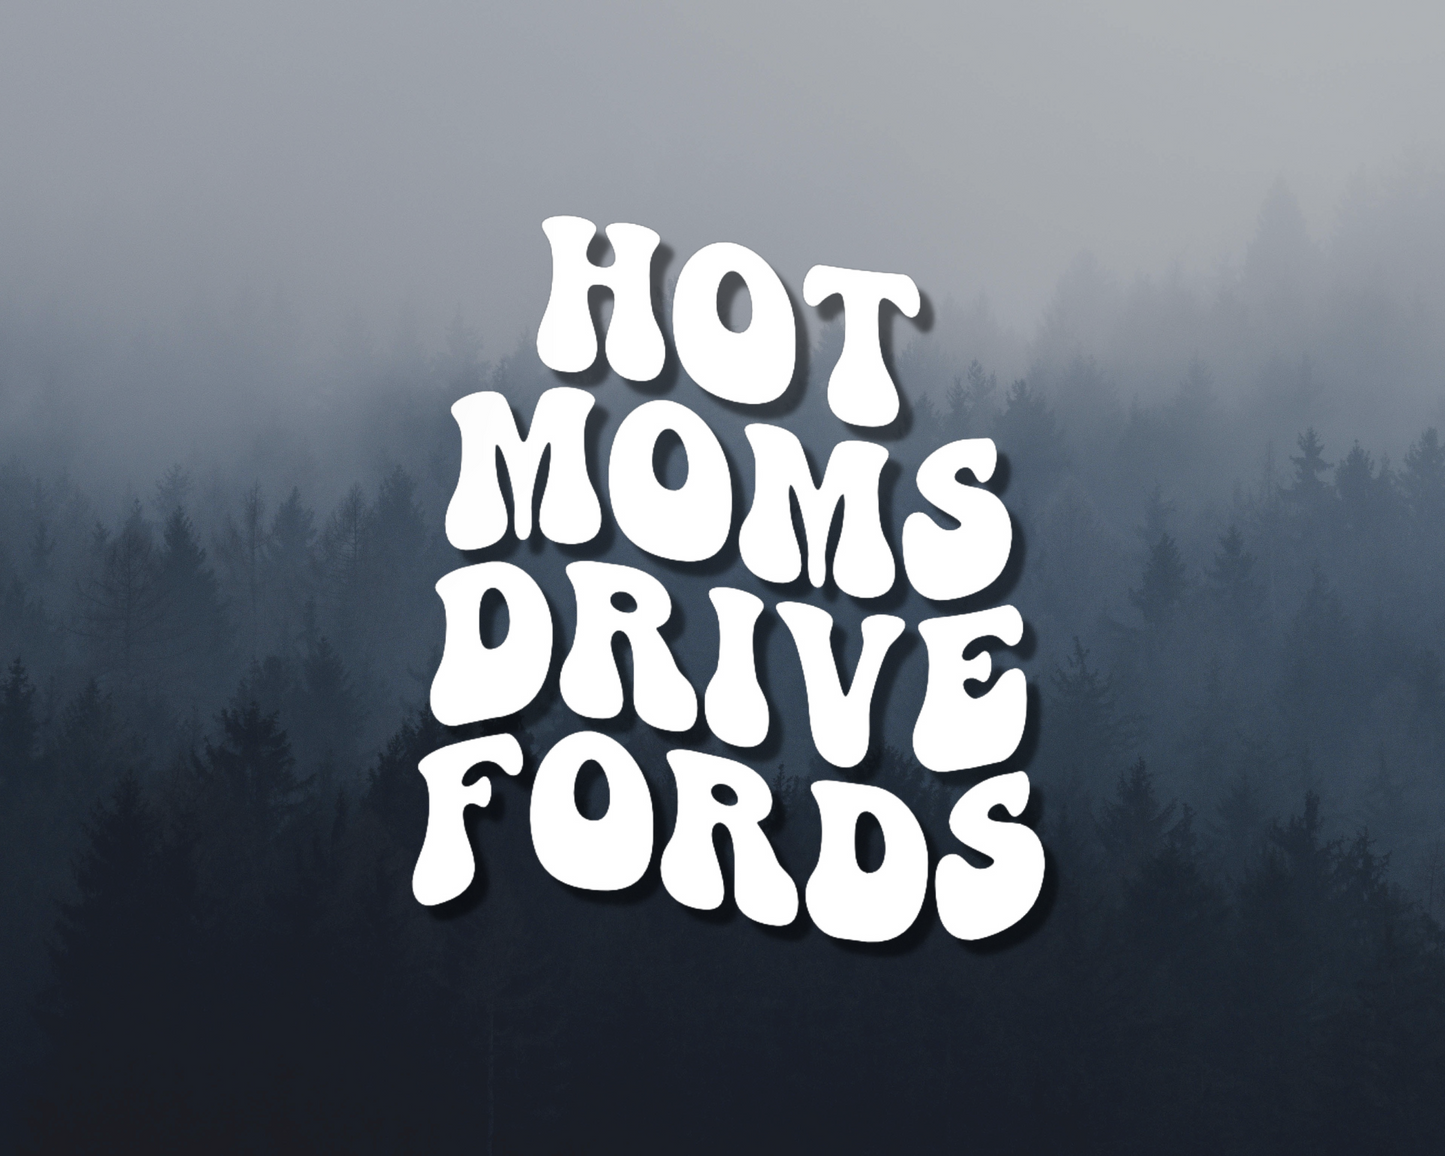 Hot Moms Drive Fords